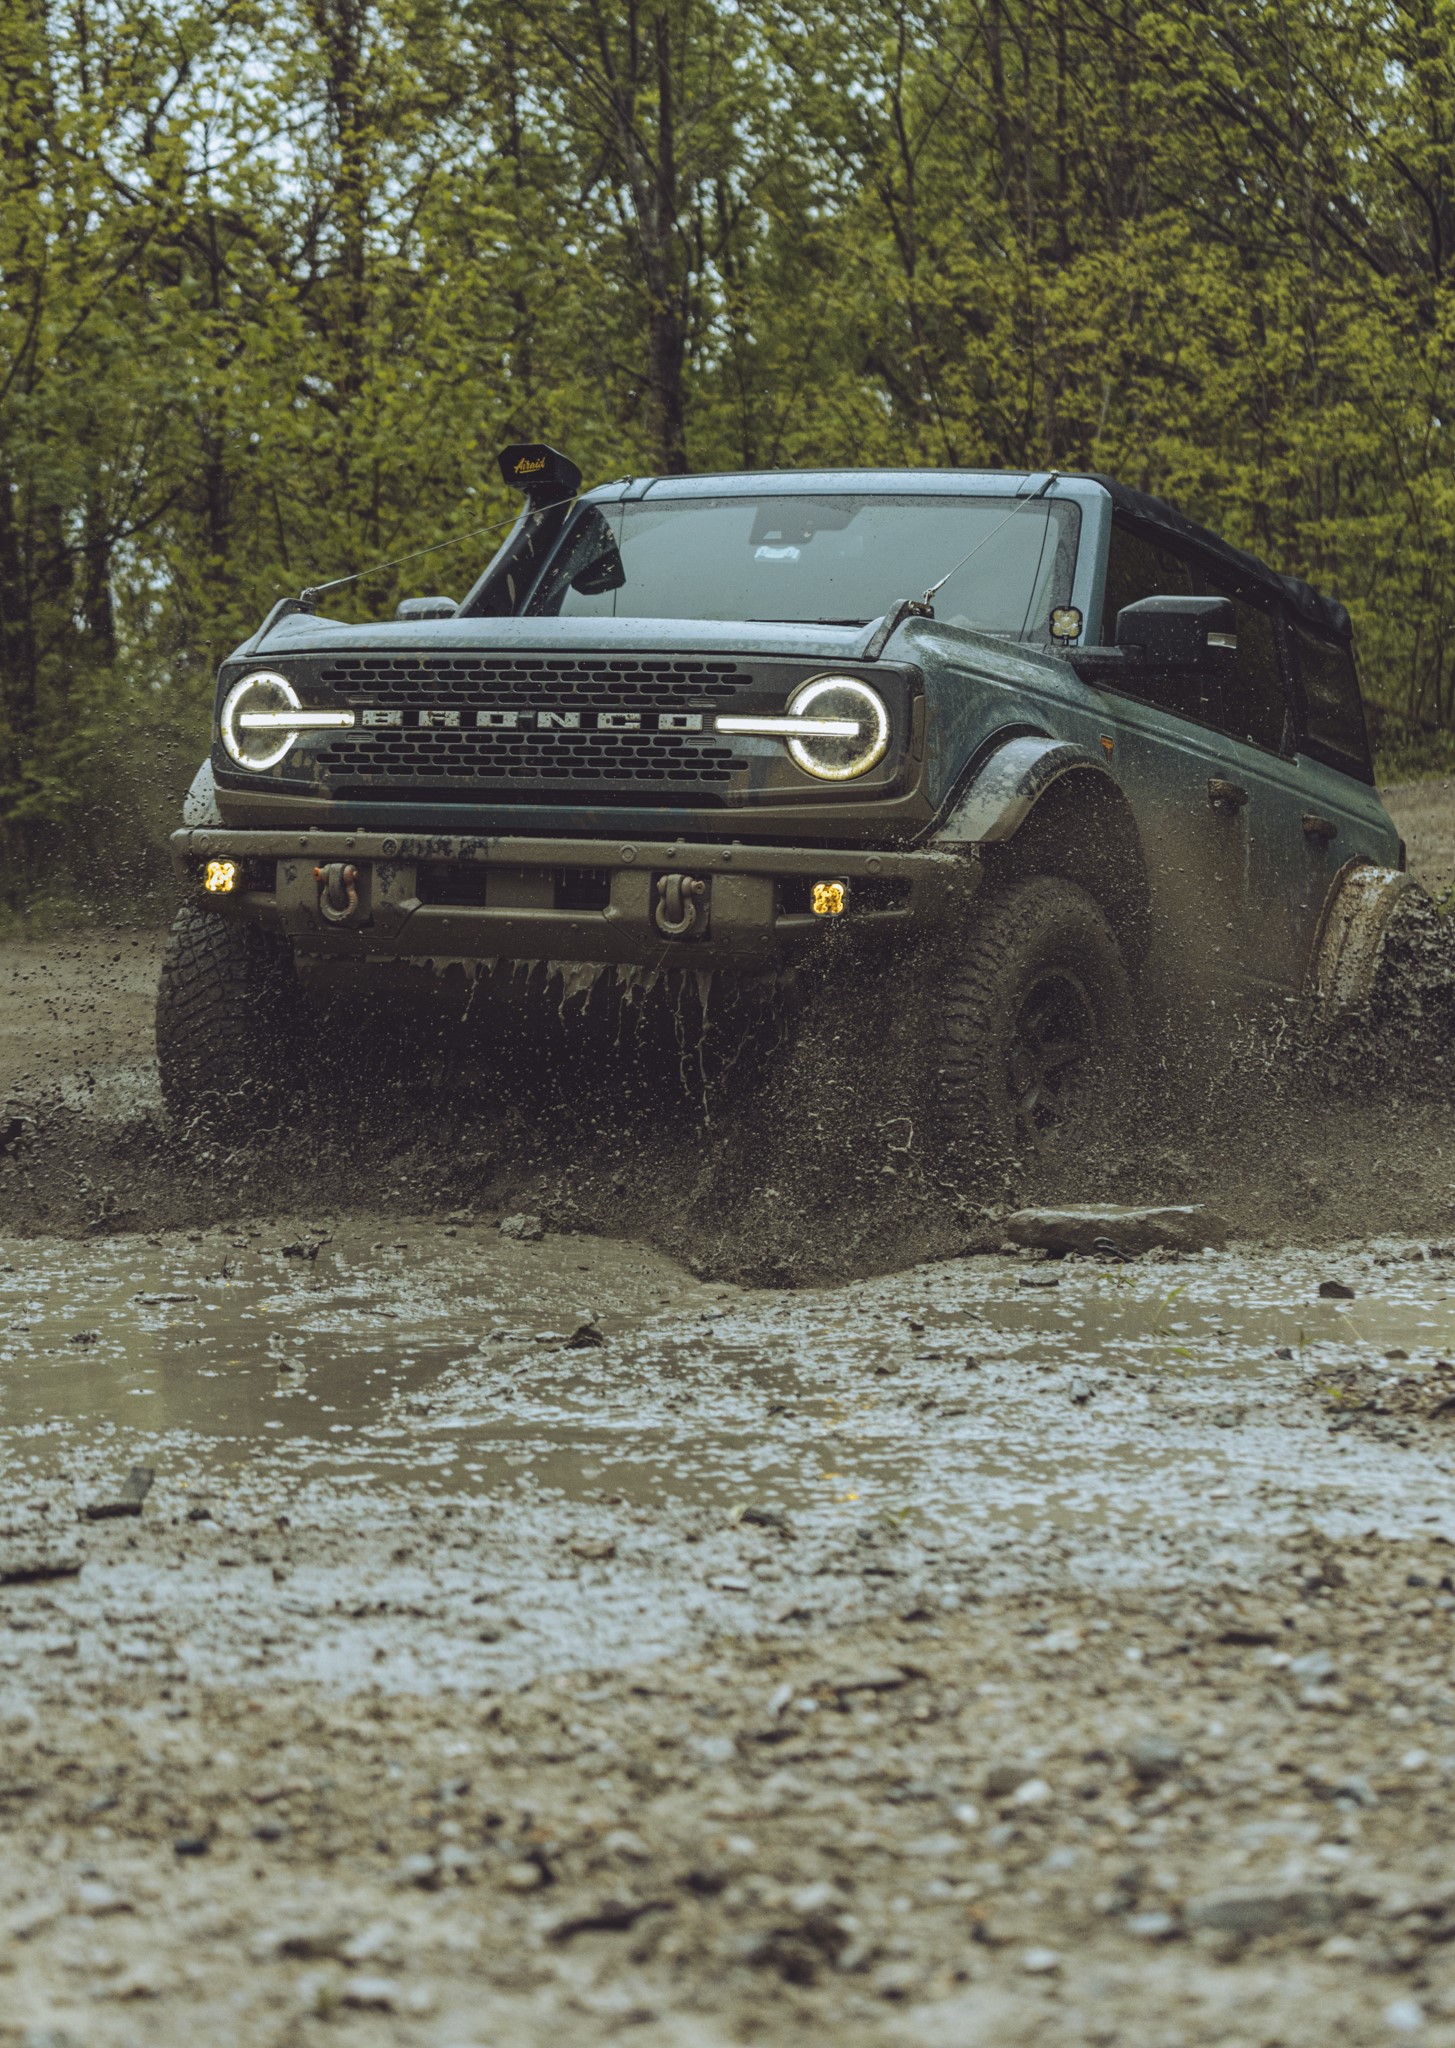 Ford Bronco Metalcloak Giveaway - May/June - Lower Control Arm Skids! PATD -66